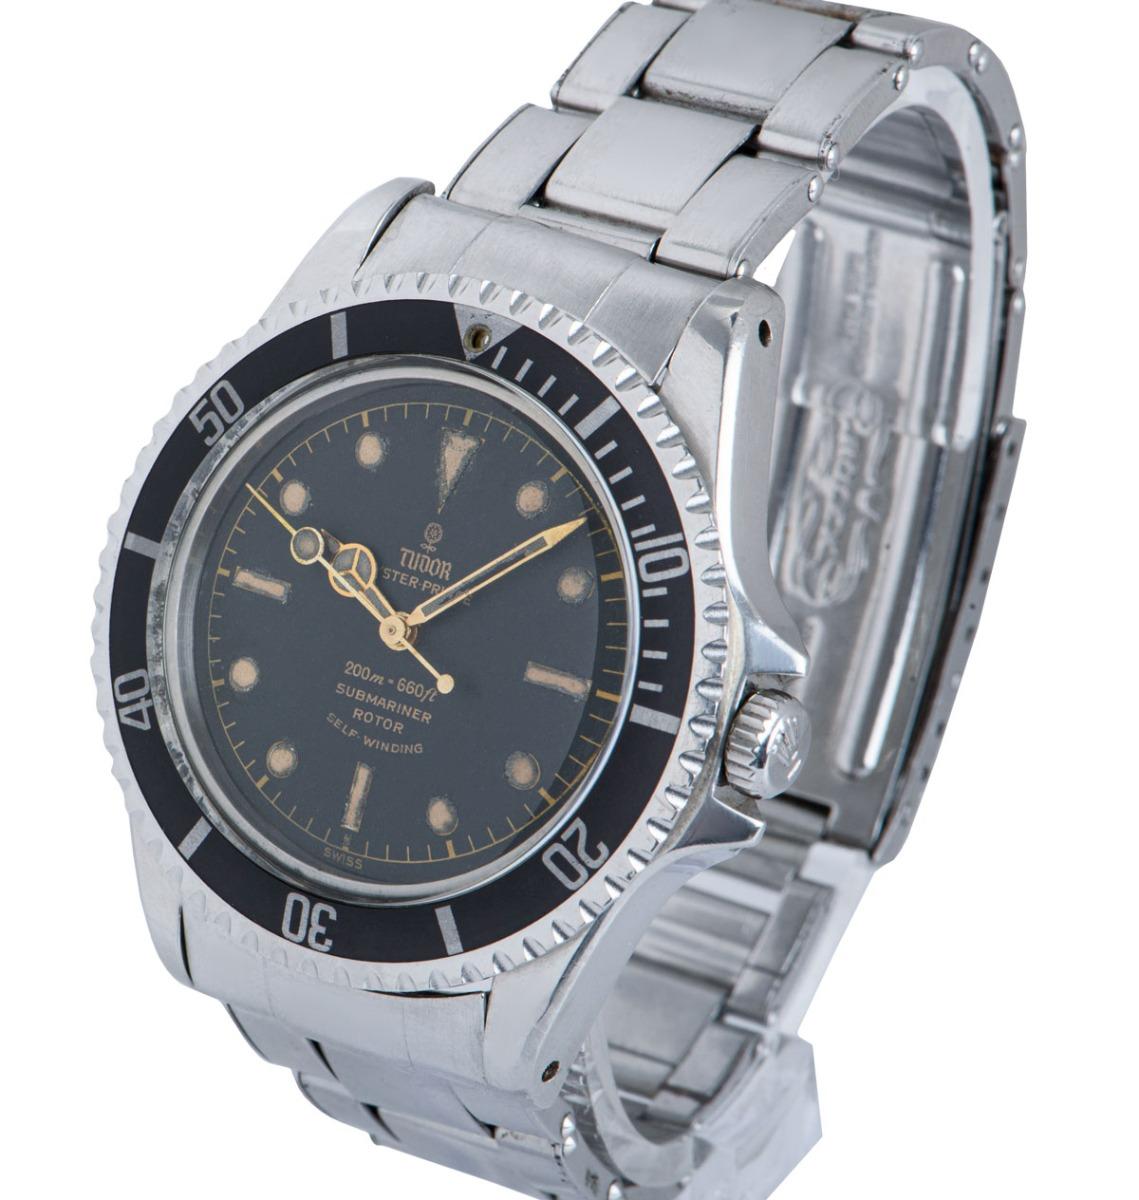 This 40 mm vintage stainless steel Submariner is potentially the most classic sports model from Tudor. Features a black dial with a gilt track, gilt writing and an exclamation dot directly below the main hour marker at 6 o'clock. The dot was brought